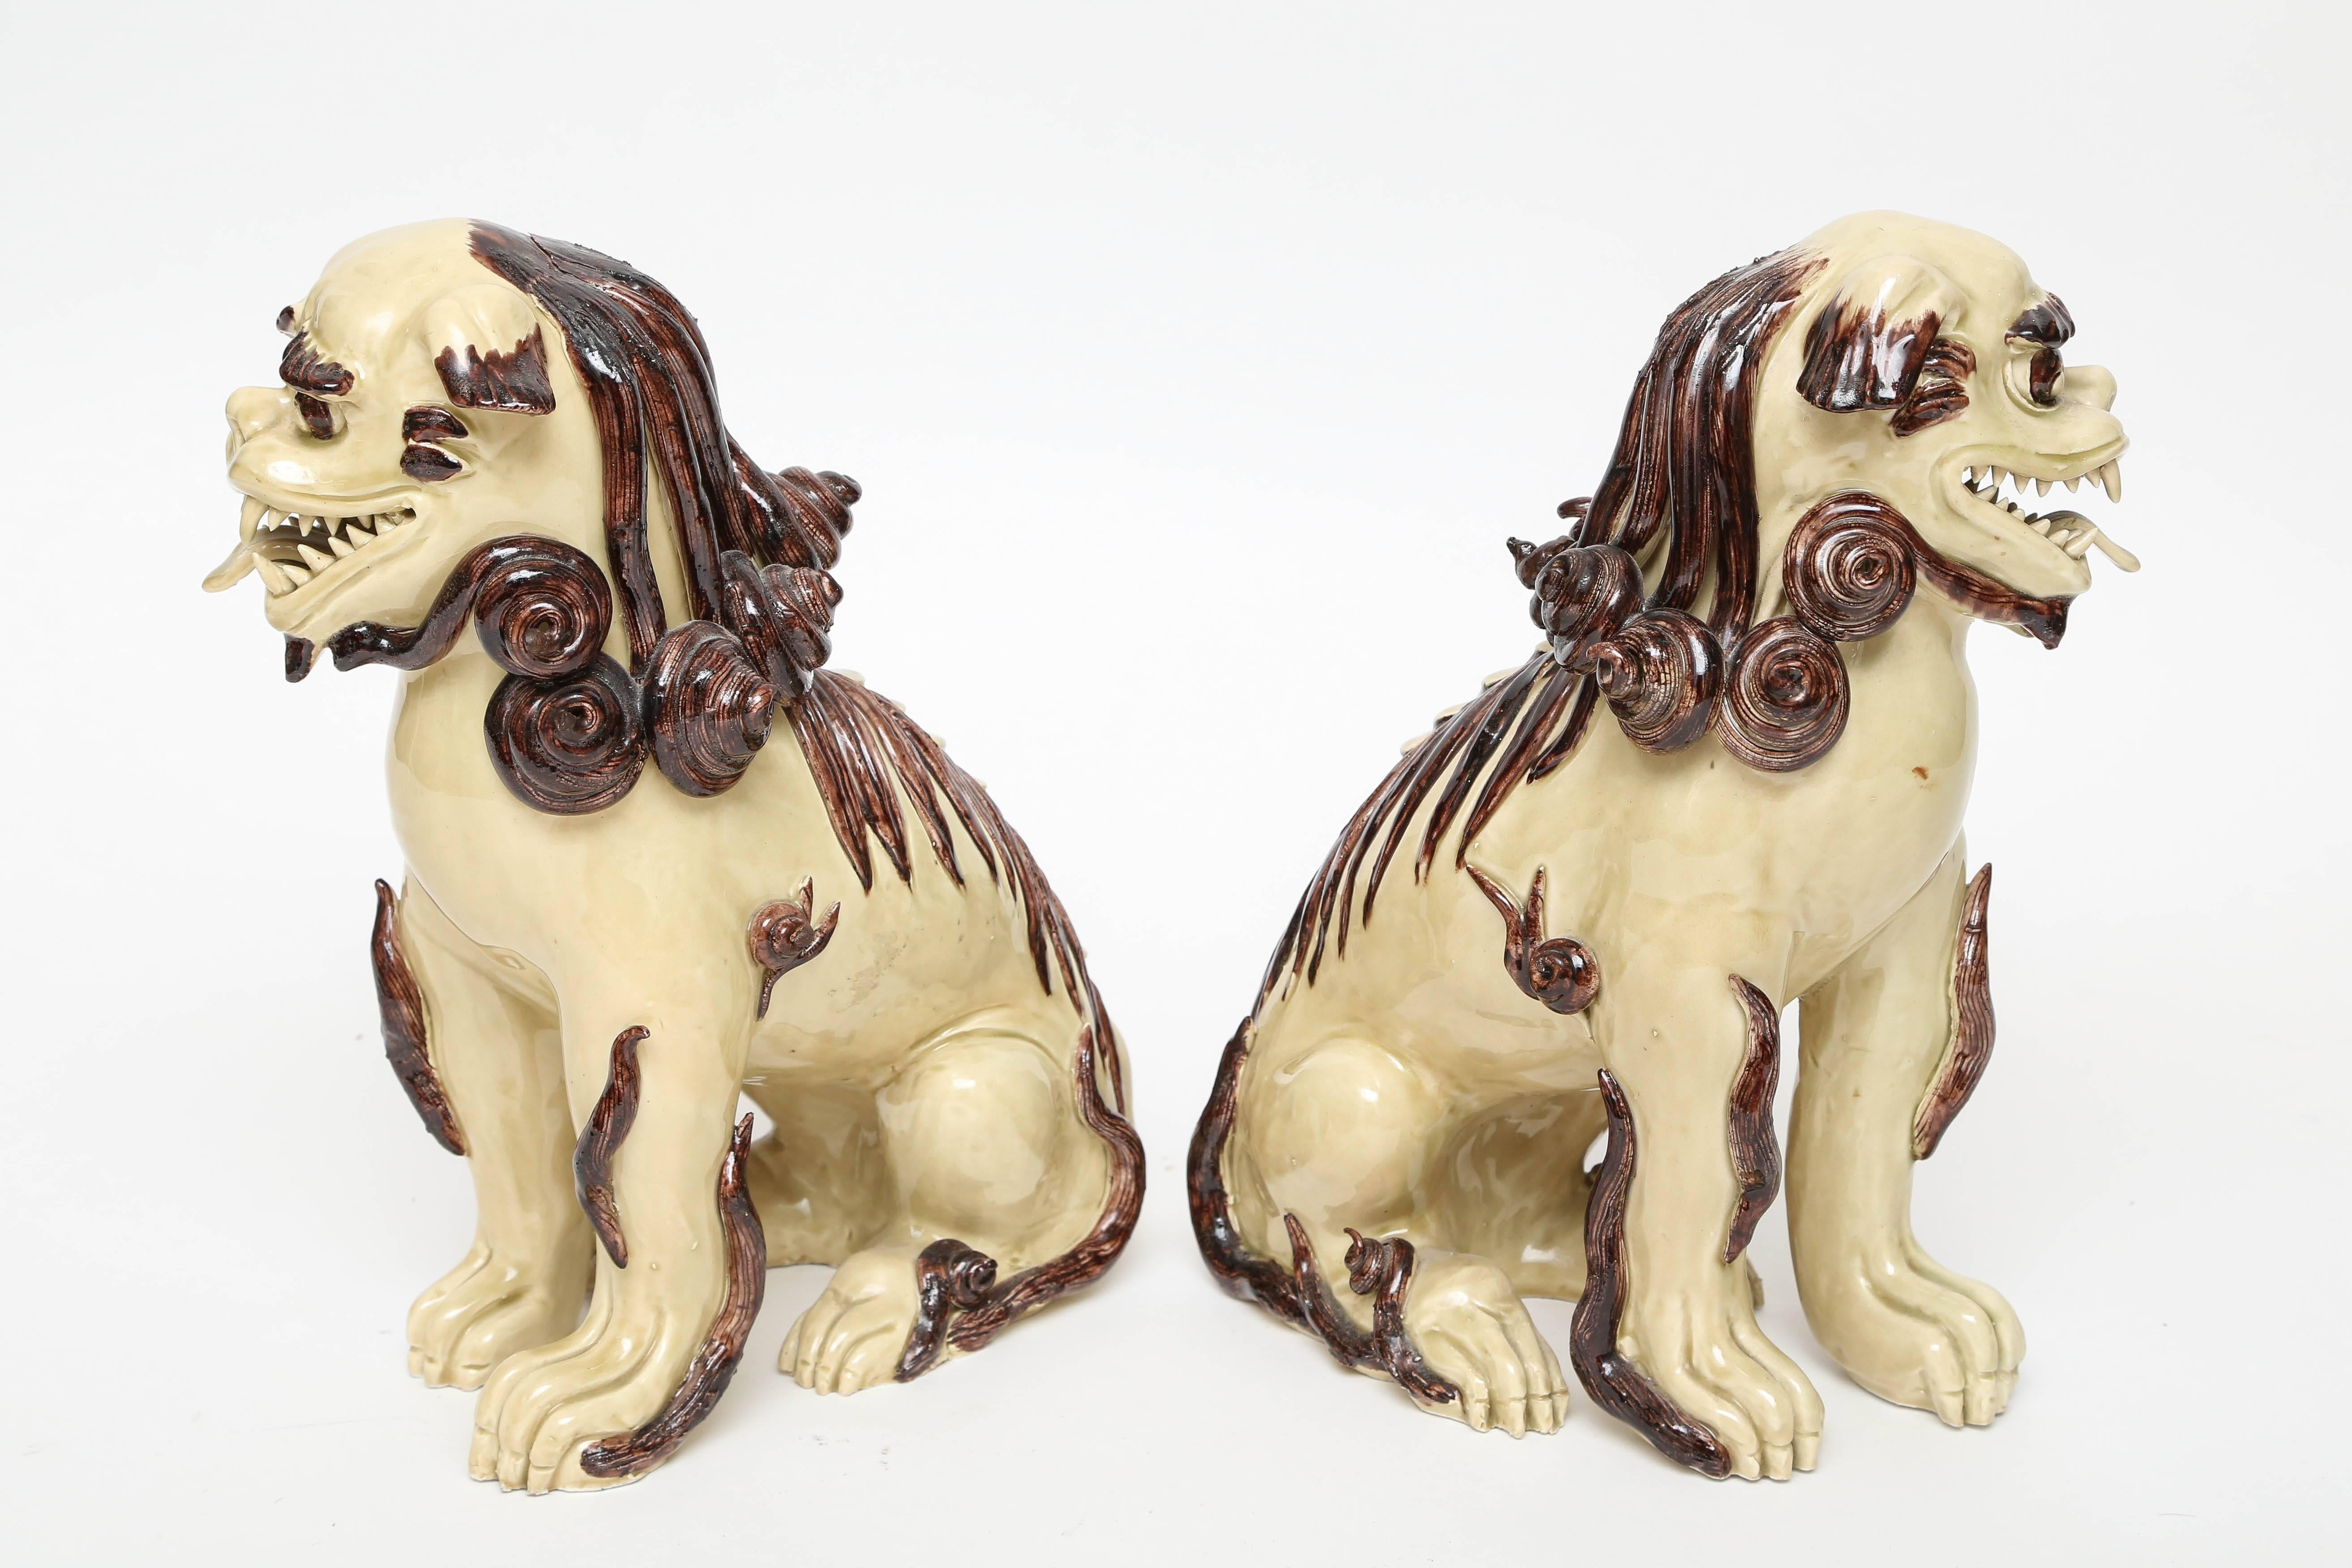 Lovely pair of cream and brown glazed Foo dogs made in Italy for Paul Hanson.